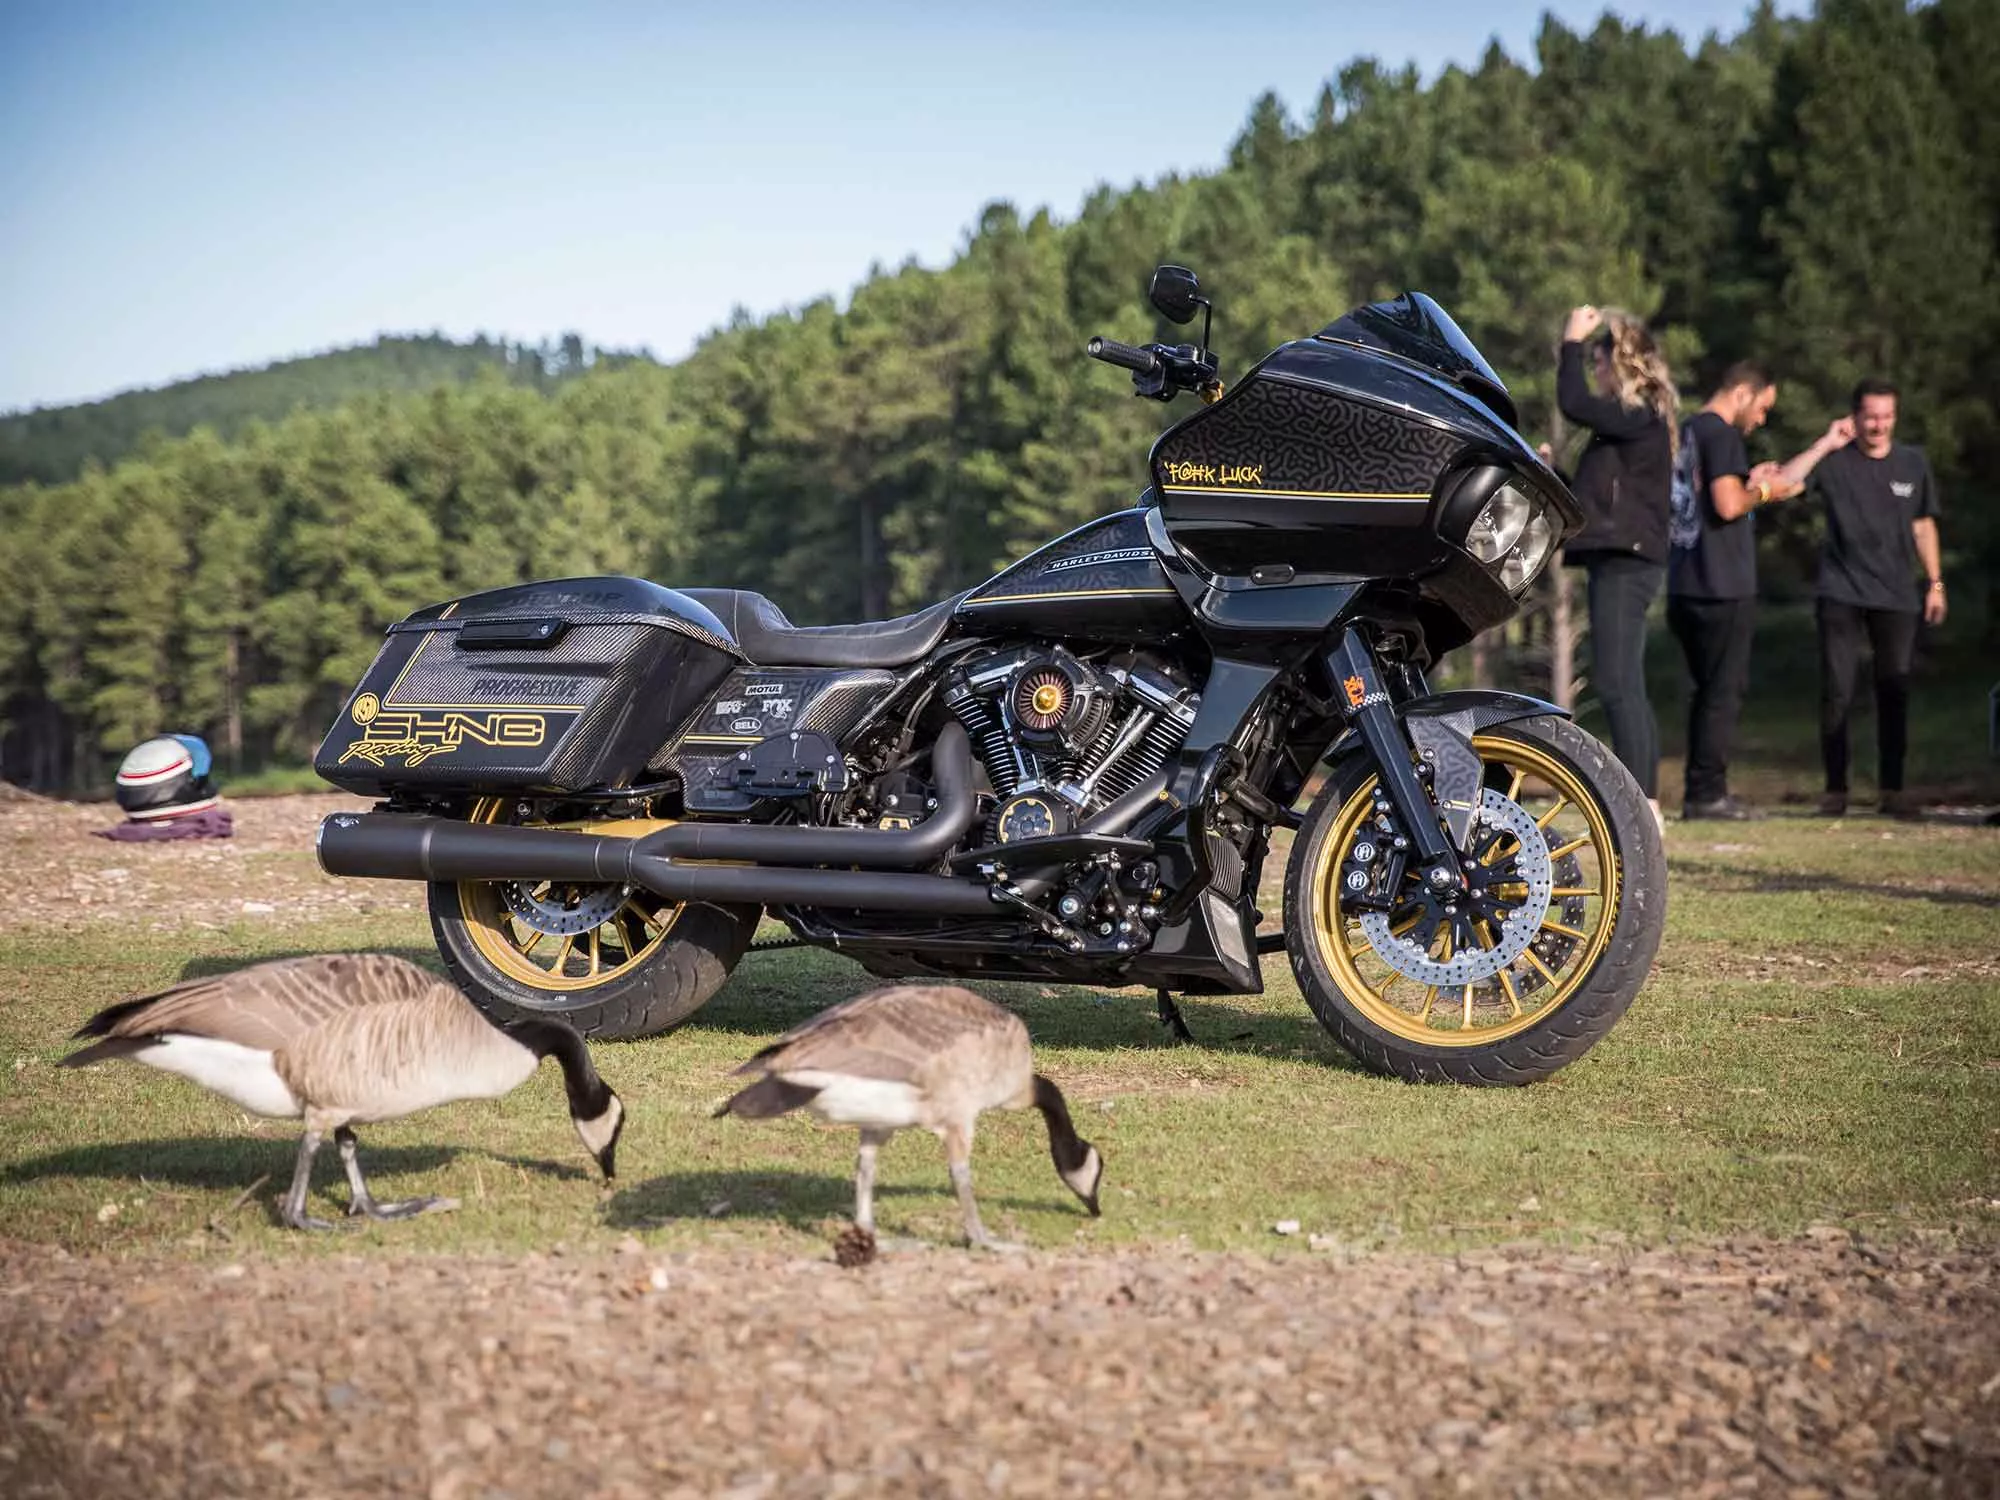 Yet another Roland Sands build that everyone is bound to flock to. 